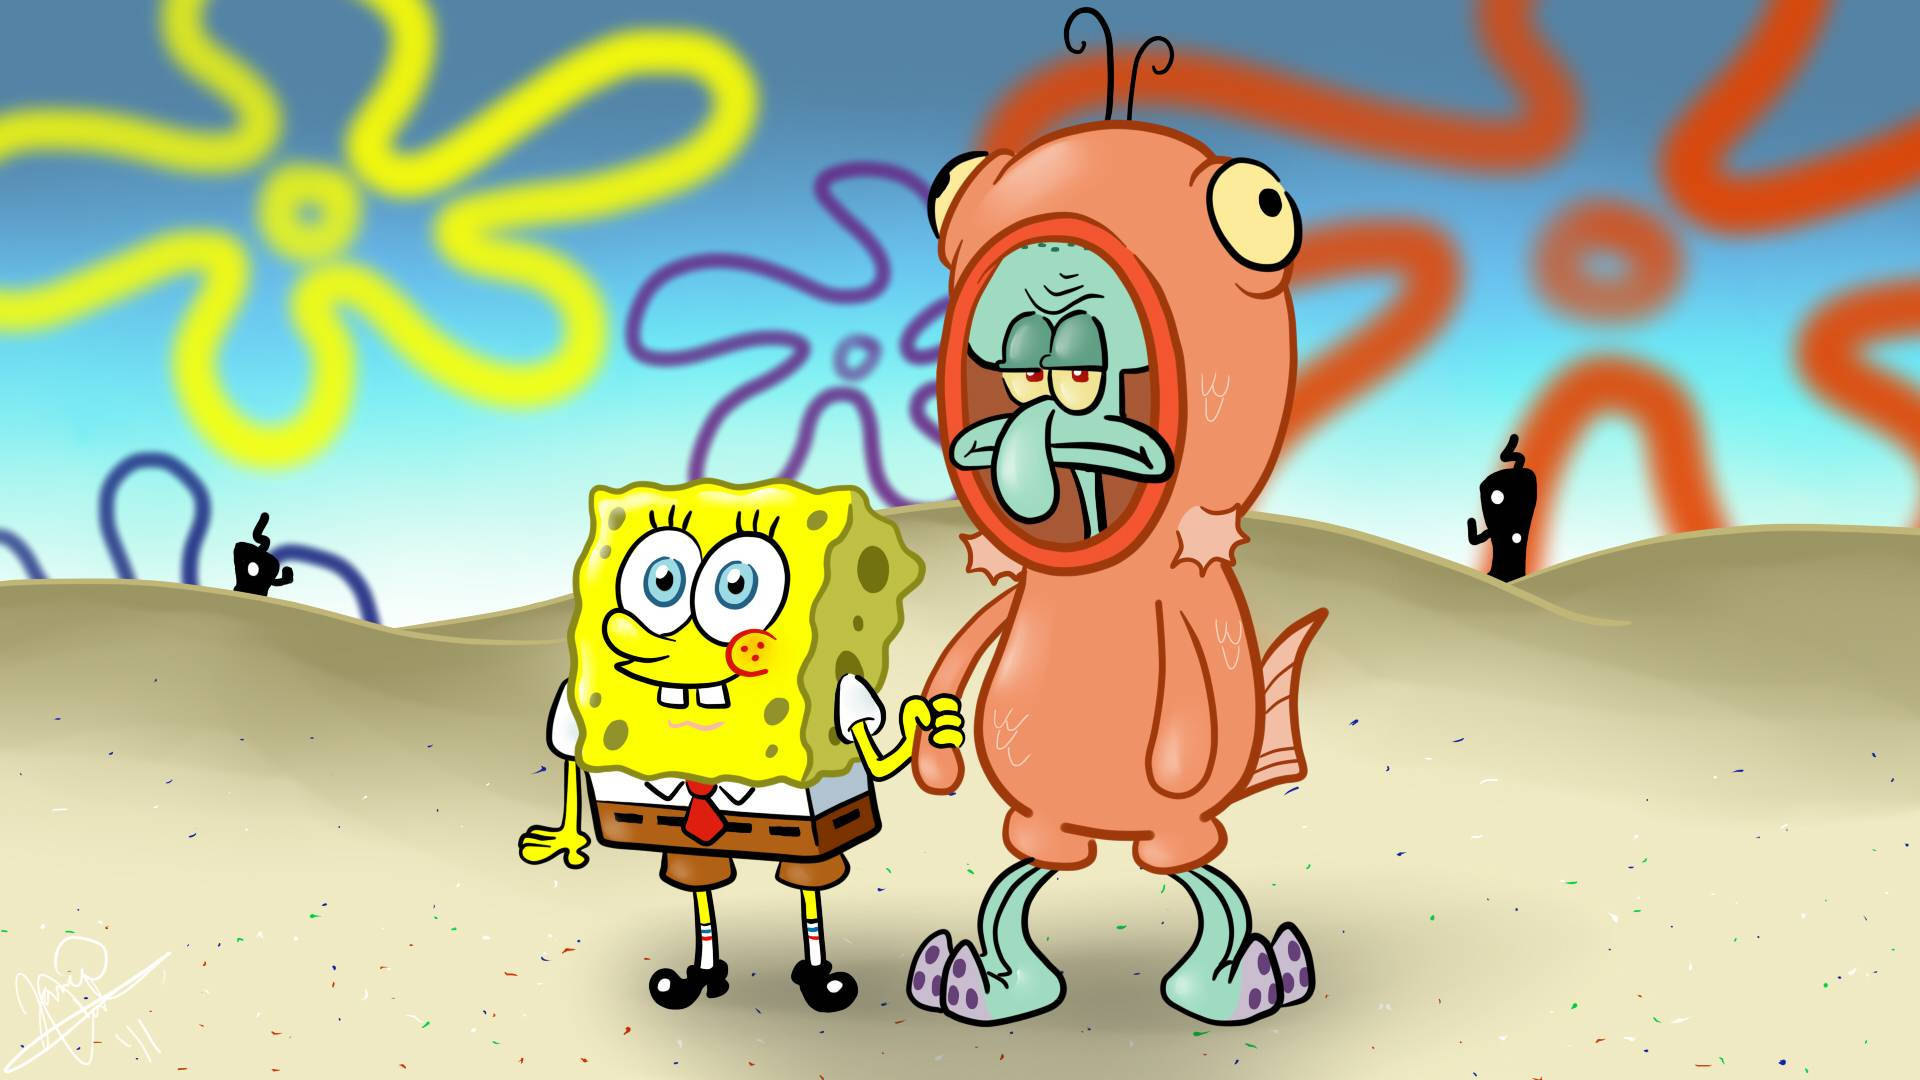 Squidward Tentacles Dresses Up in a Fish Costume with Spongebob Wallpaper